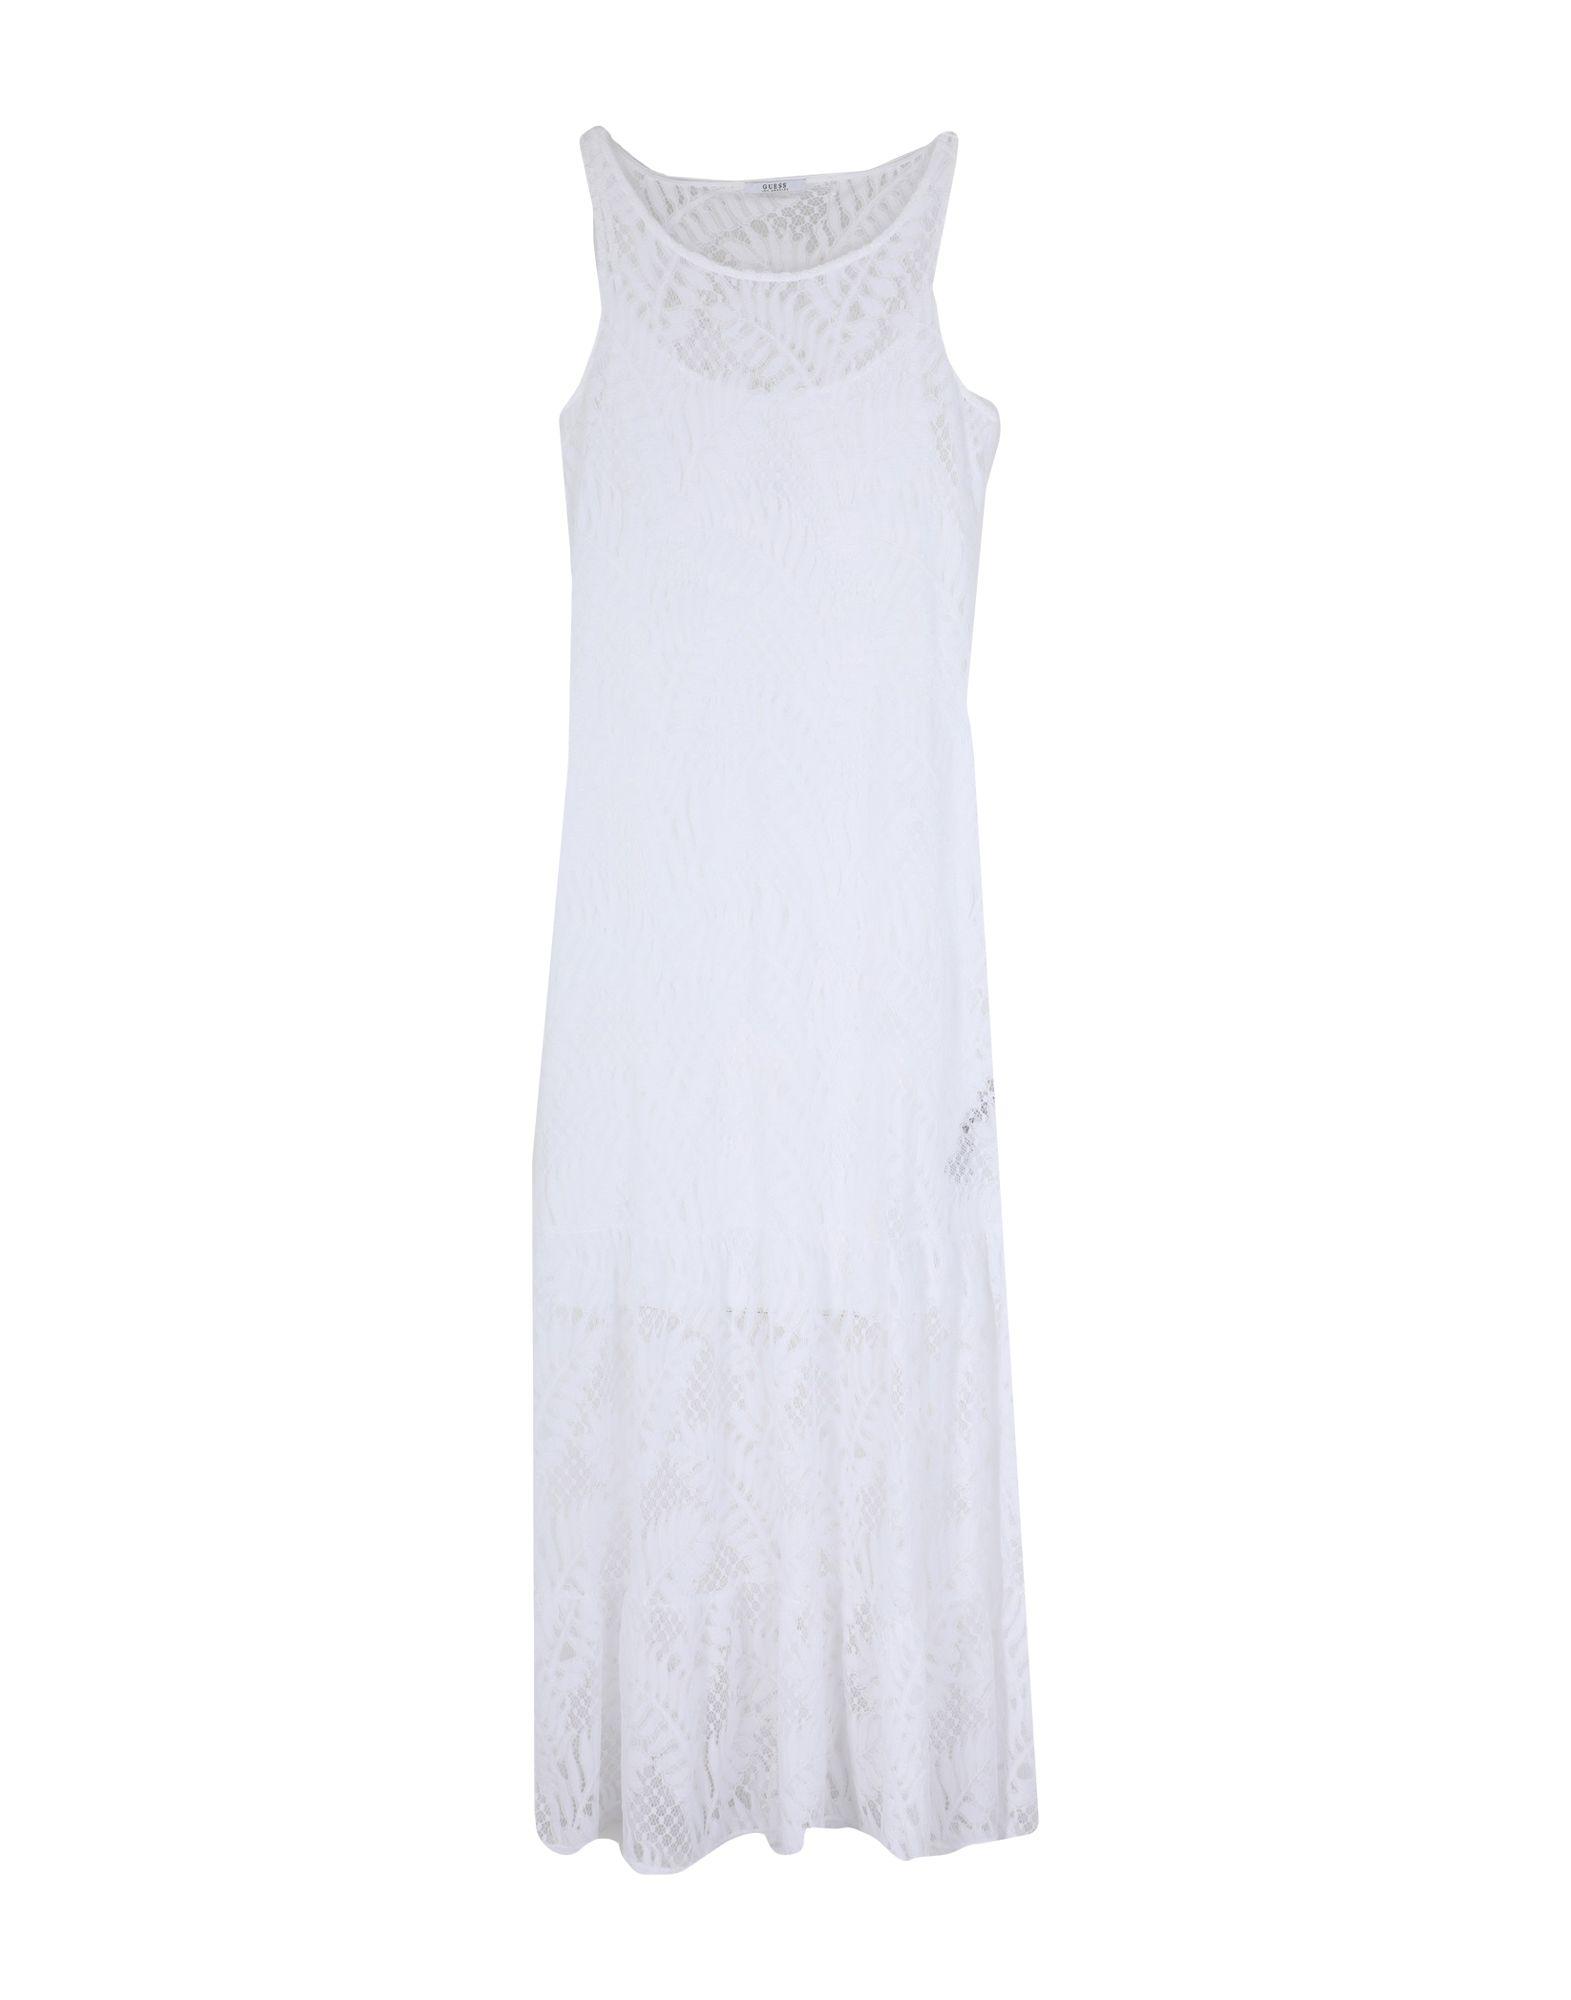 Guess Lace Long Dress in White - Lyst